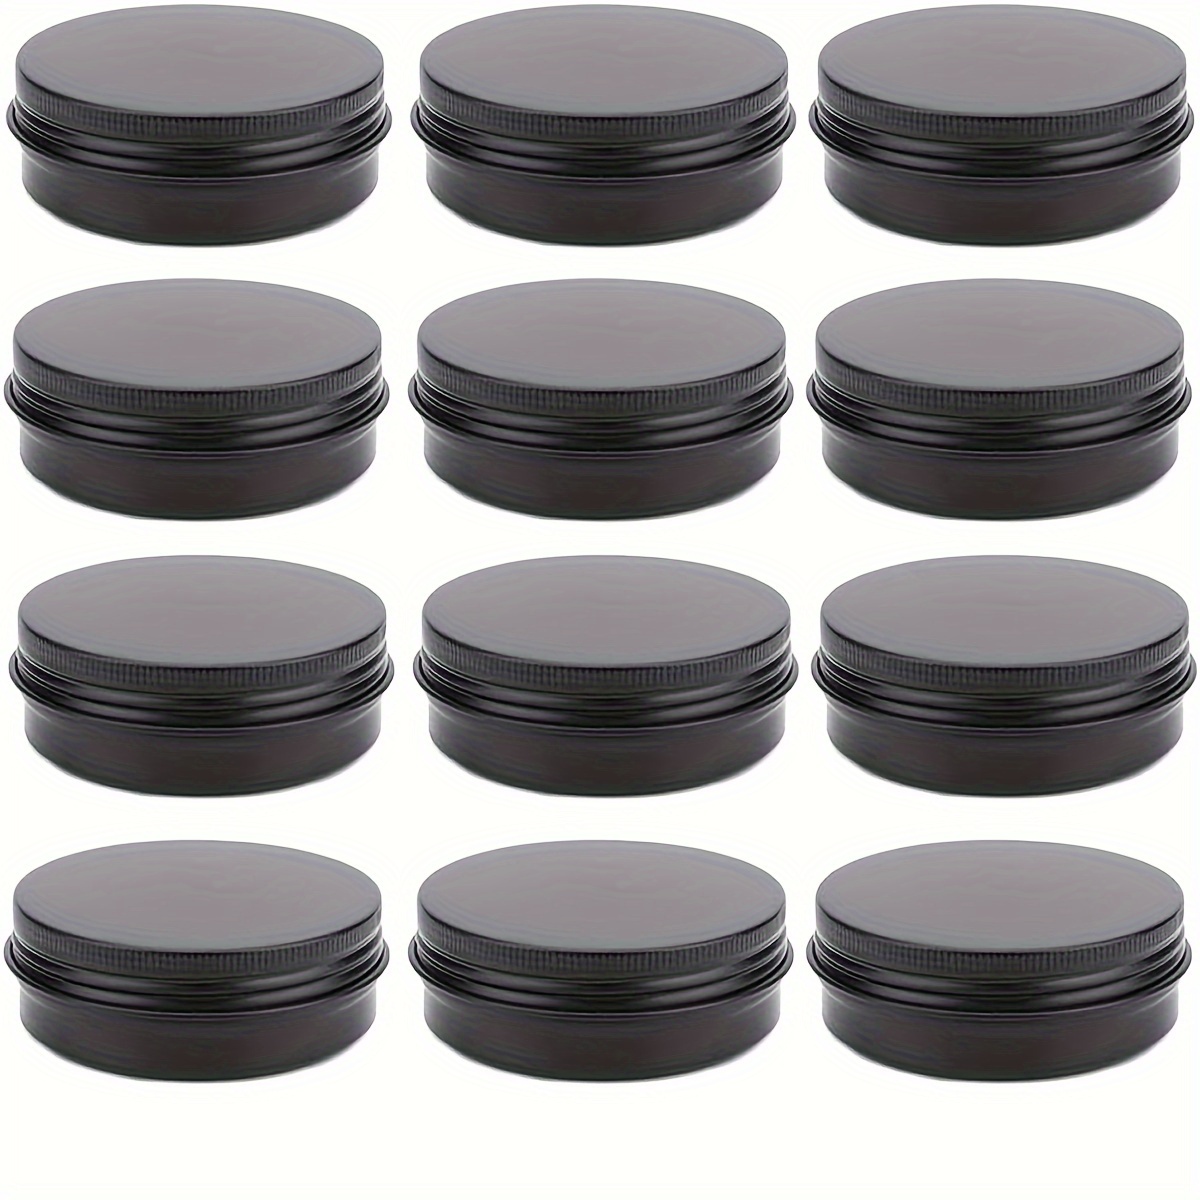 

12pcs 2oz Black Tin Cans With Screw Top Lids, Metal Round Salve Containers, Aluminum Empty Cream Jars For Ointment, Spices, Or Candies